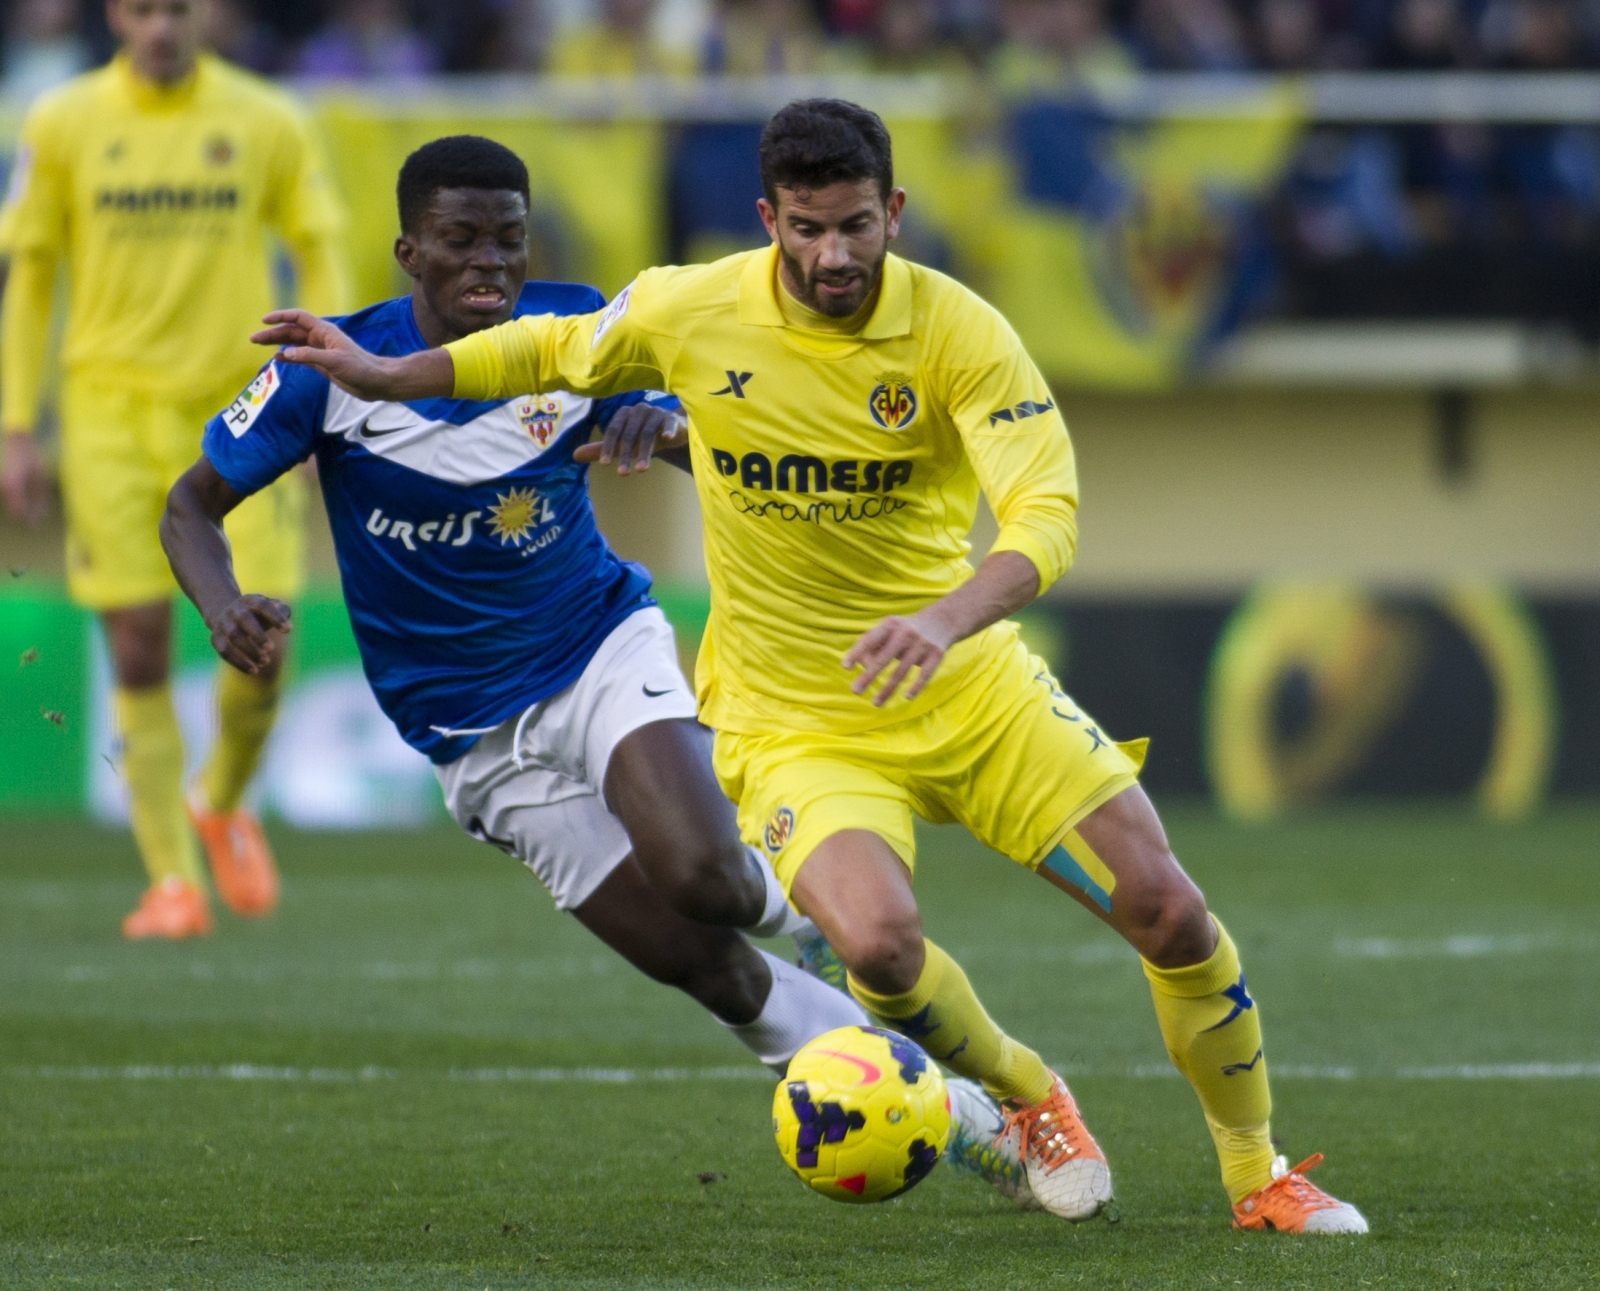 tottenham-s-former-target-mateo-musacchio-confirms-chelsea-made